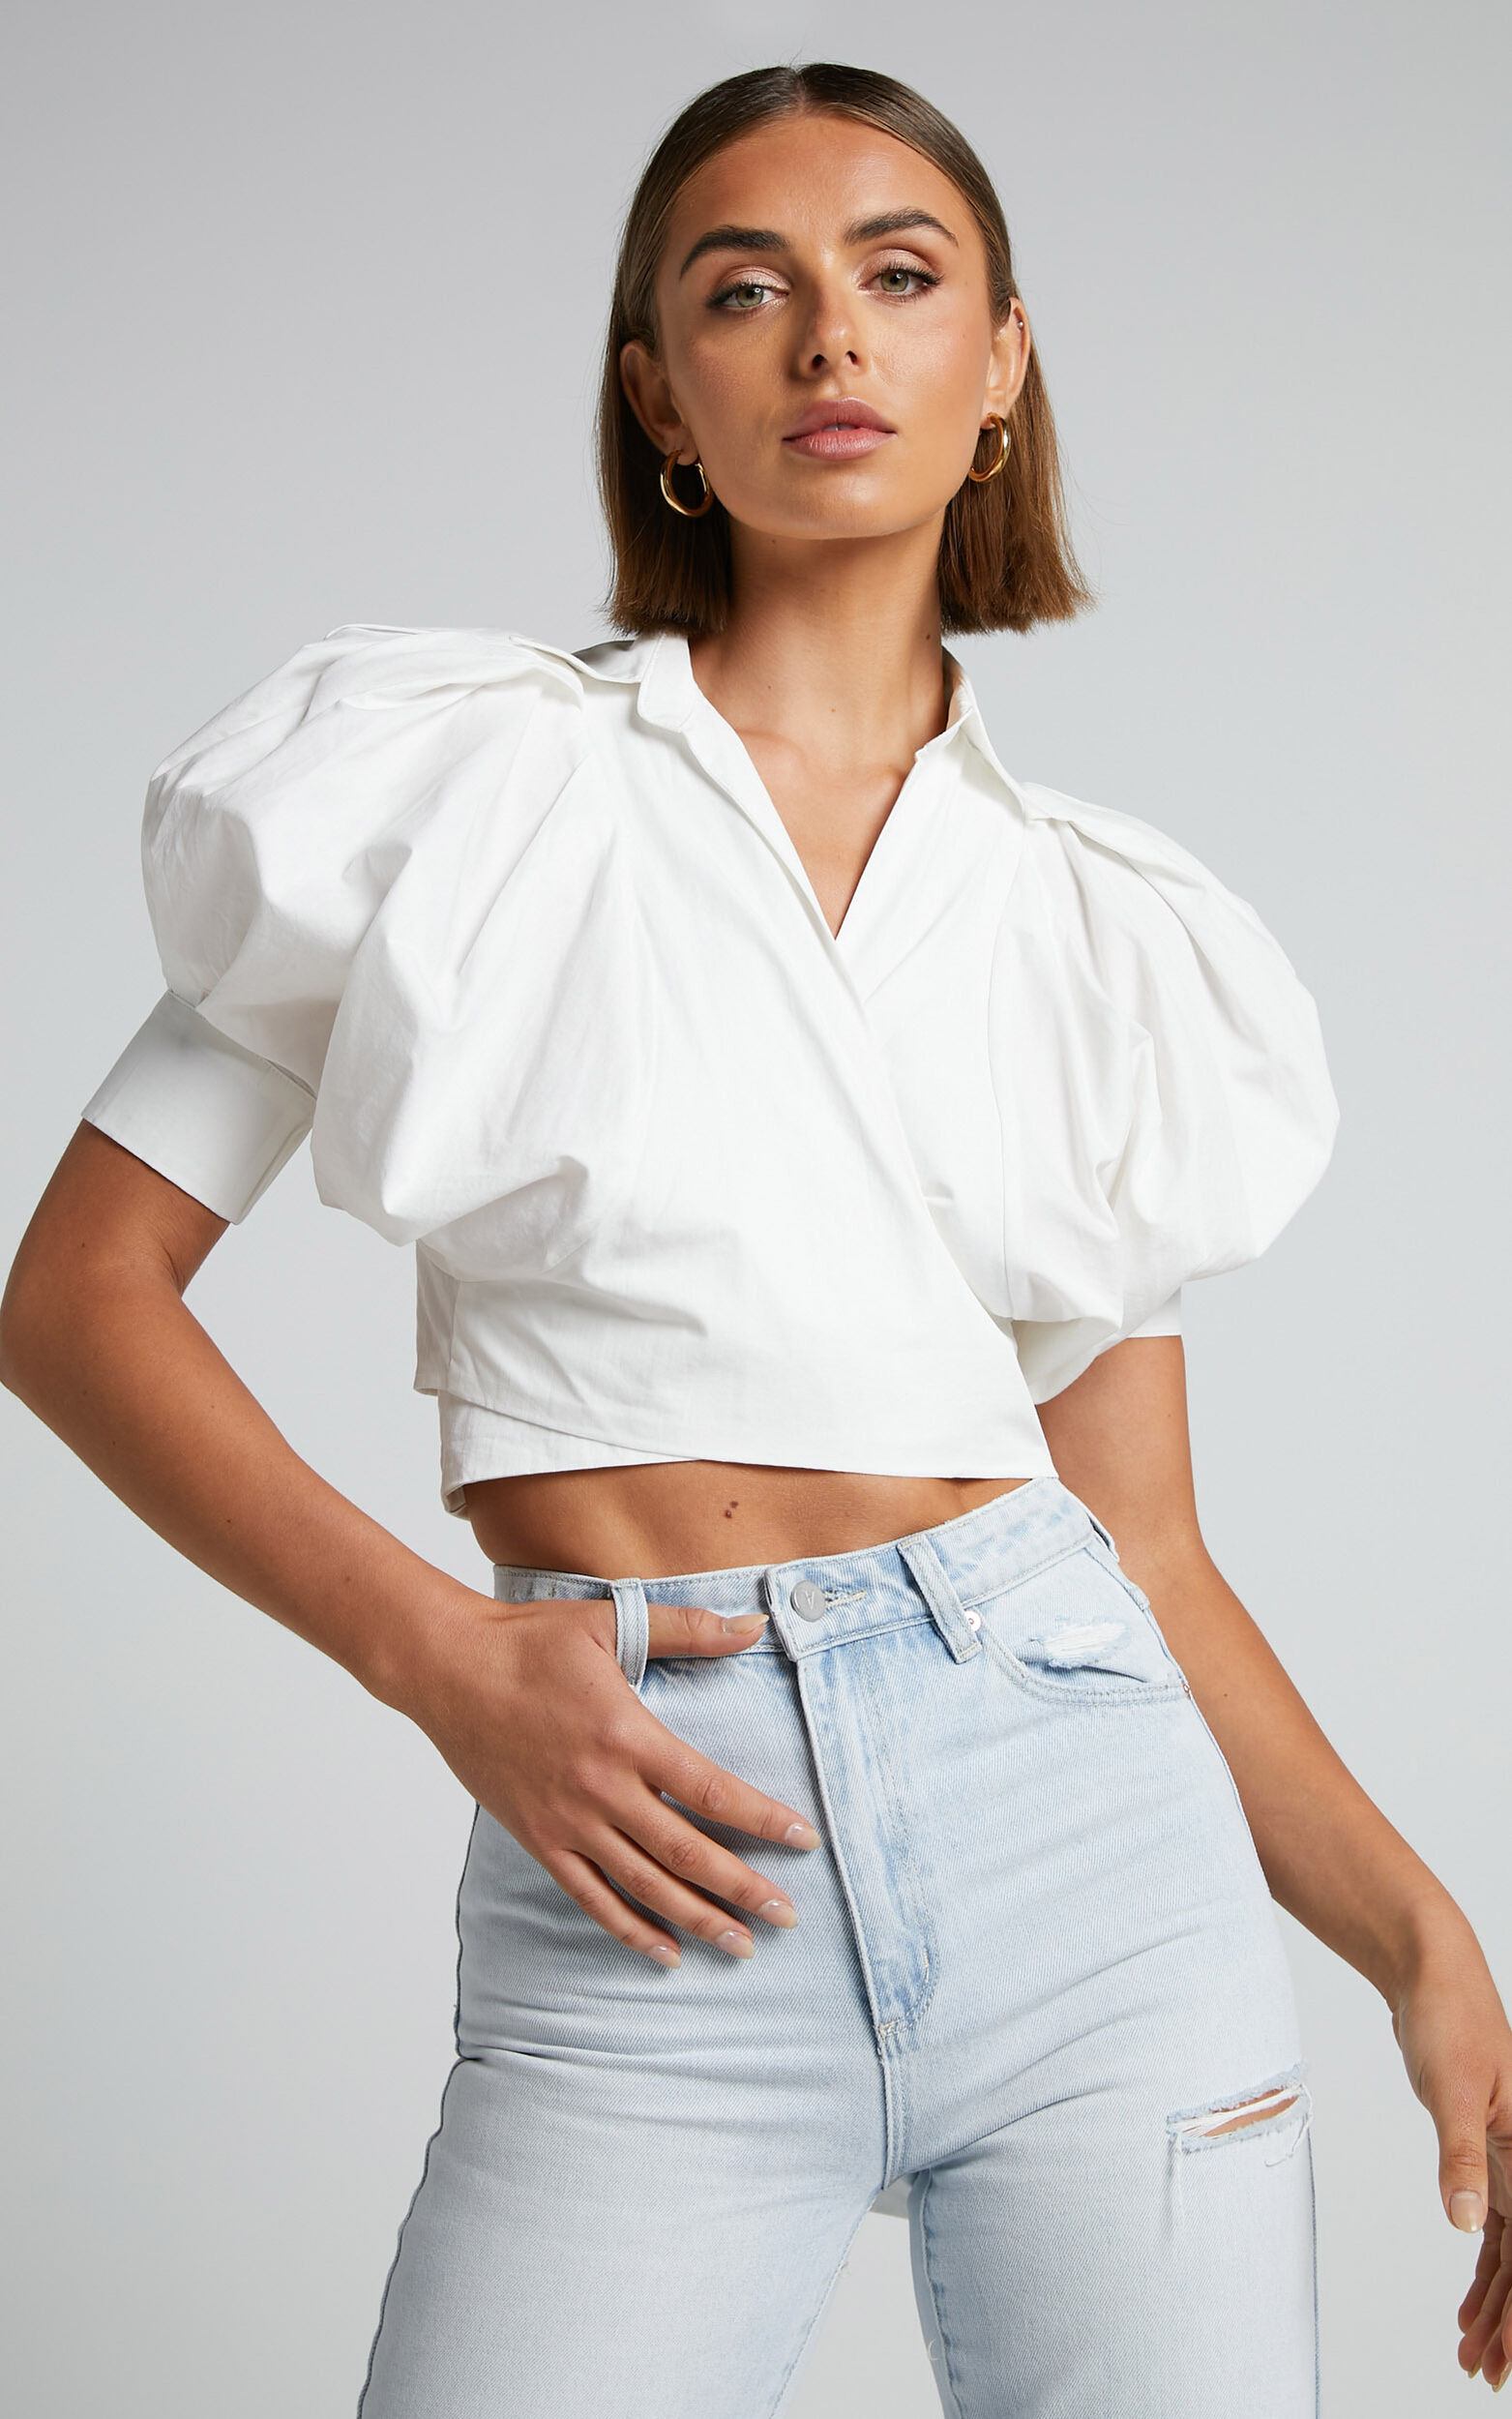 Merabelle Shirt - Puff Sleeve Cropped Wrap Shirt in White - 04, WHT1